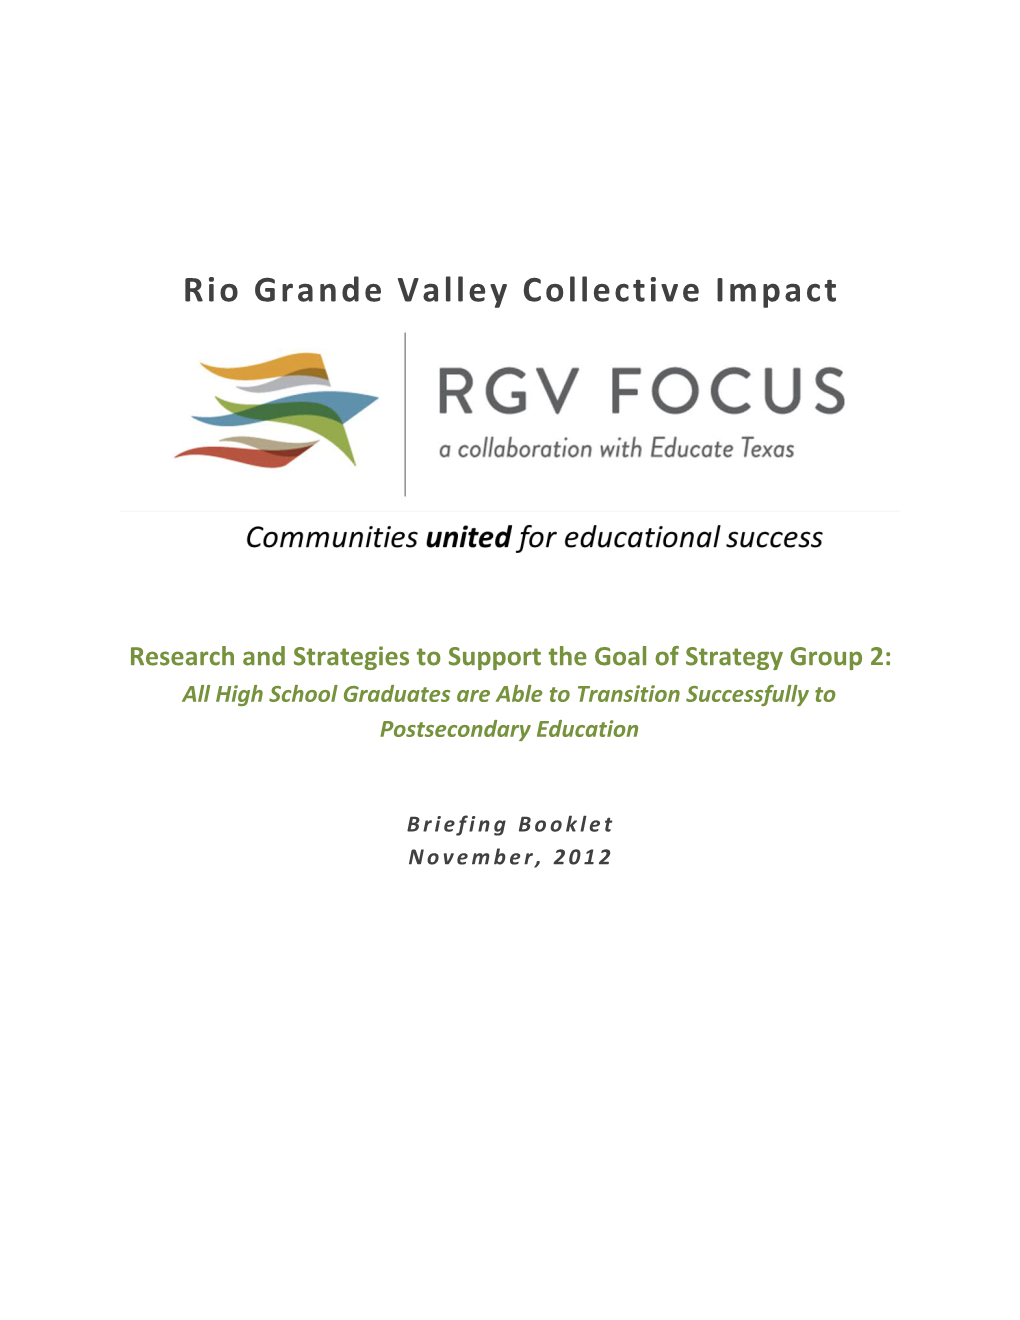 Rio Grande Valley Collective Impact Strategy Group 2 Focus Areas and Strategies